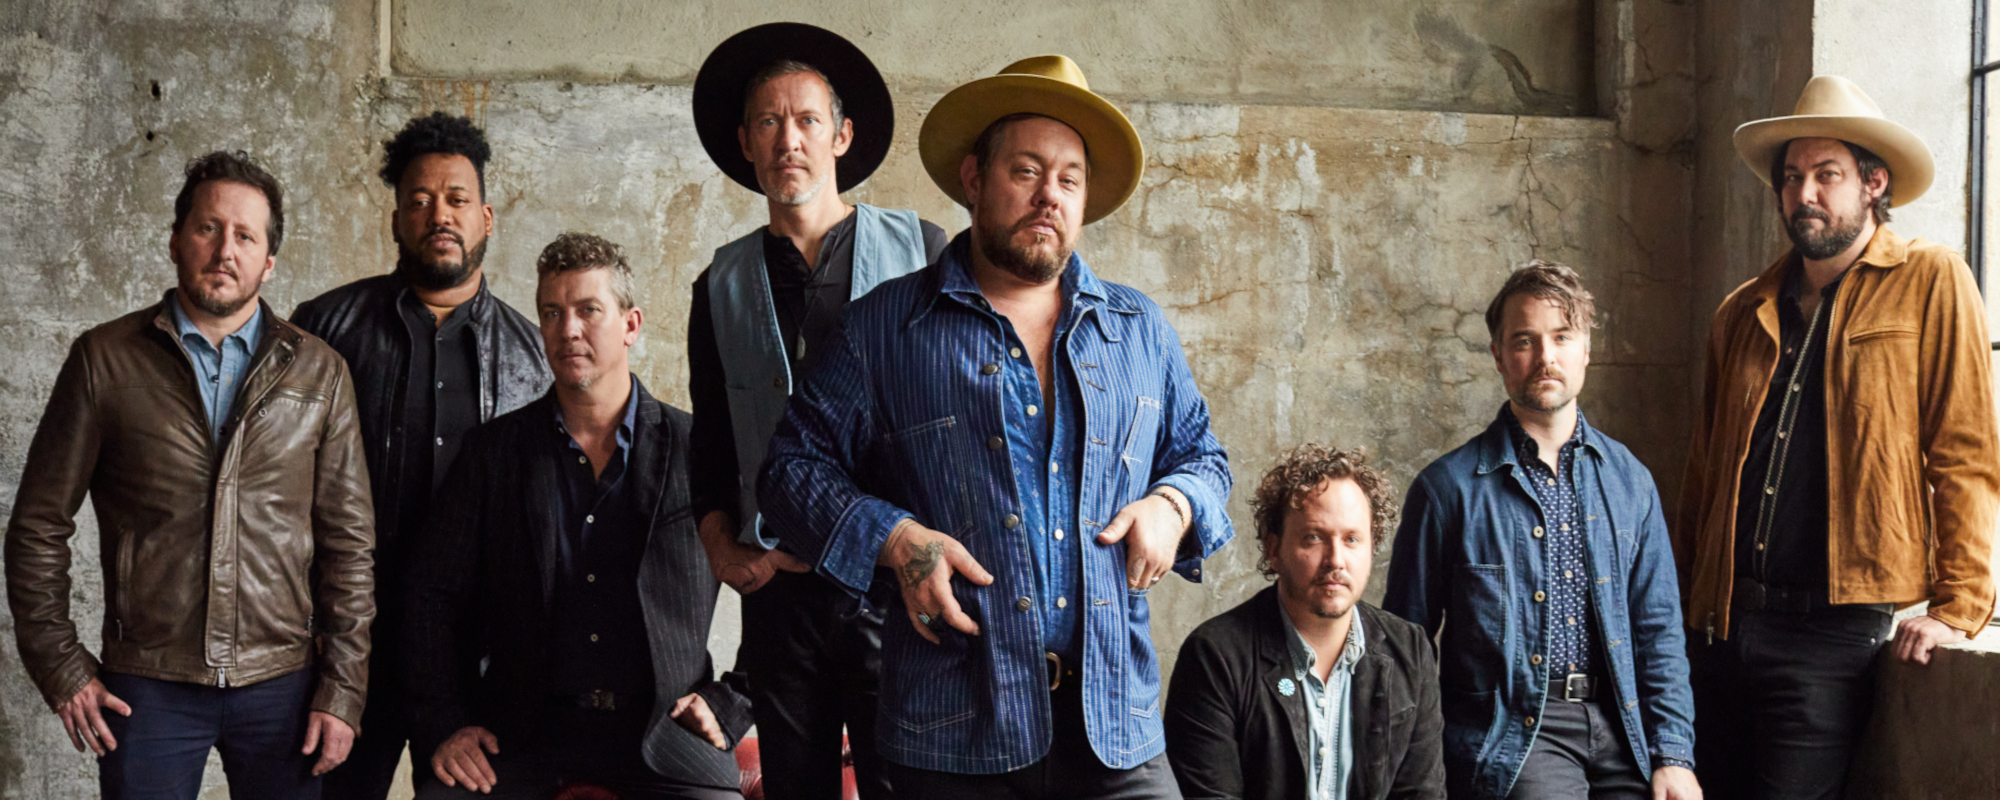 Review: Nathaniel Rateliff and The Night Sweats Offer Timely Tunes